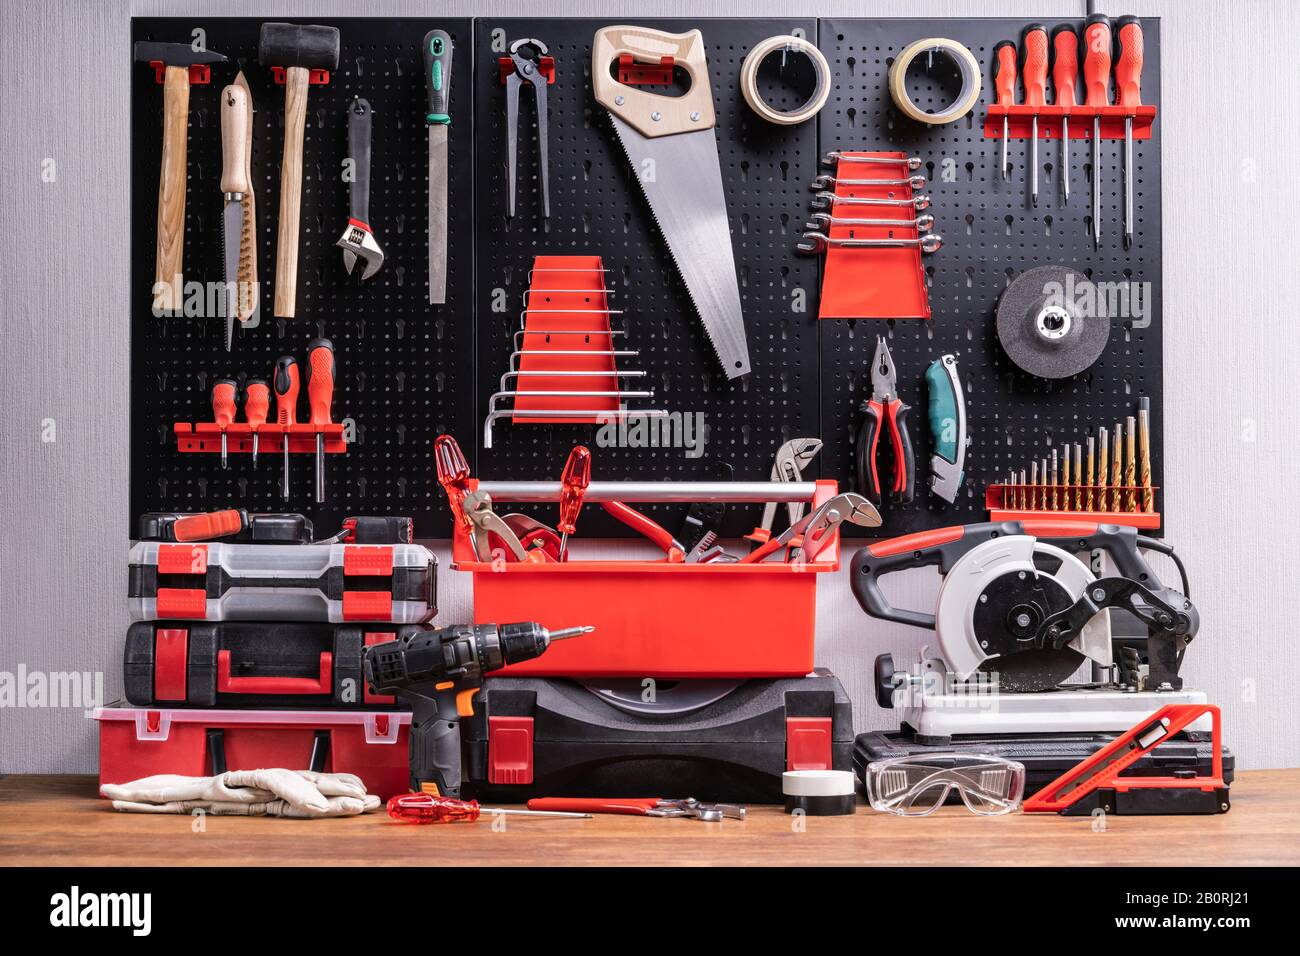 Set Working Tools Accessories Home Renovation Stock Photo 268571654